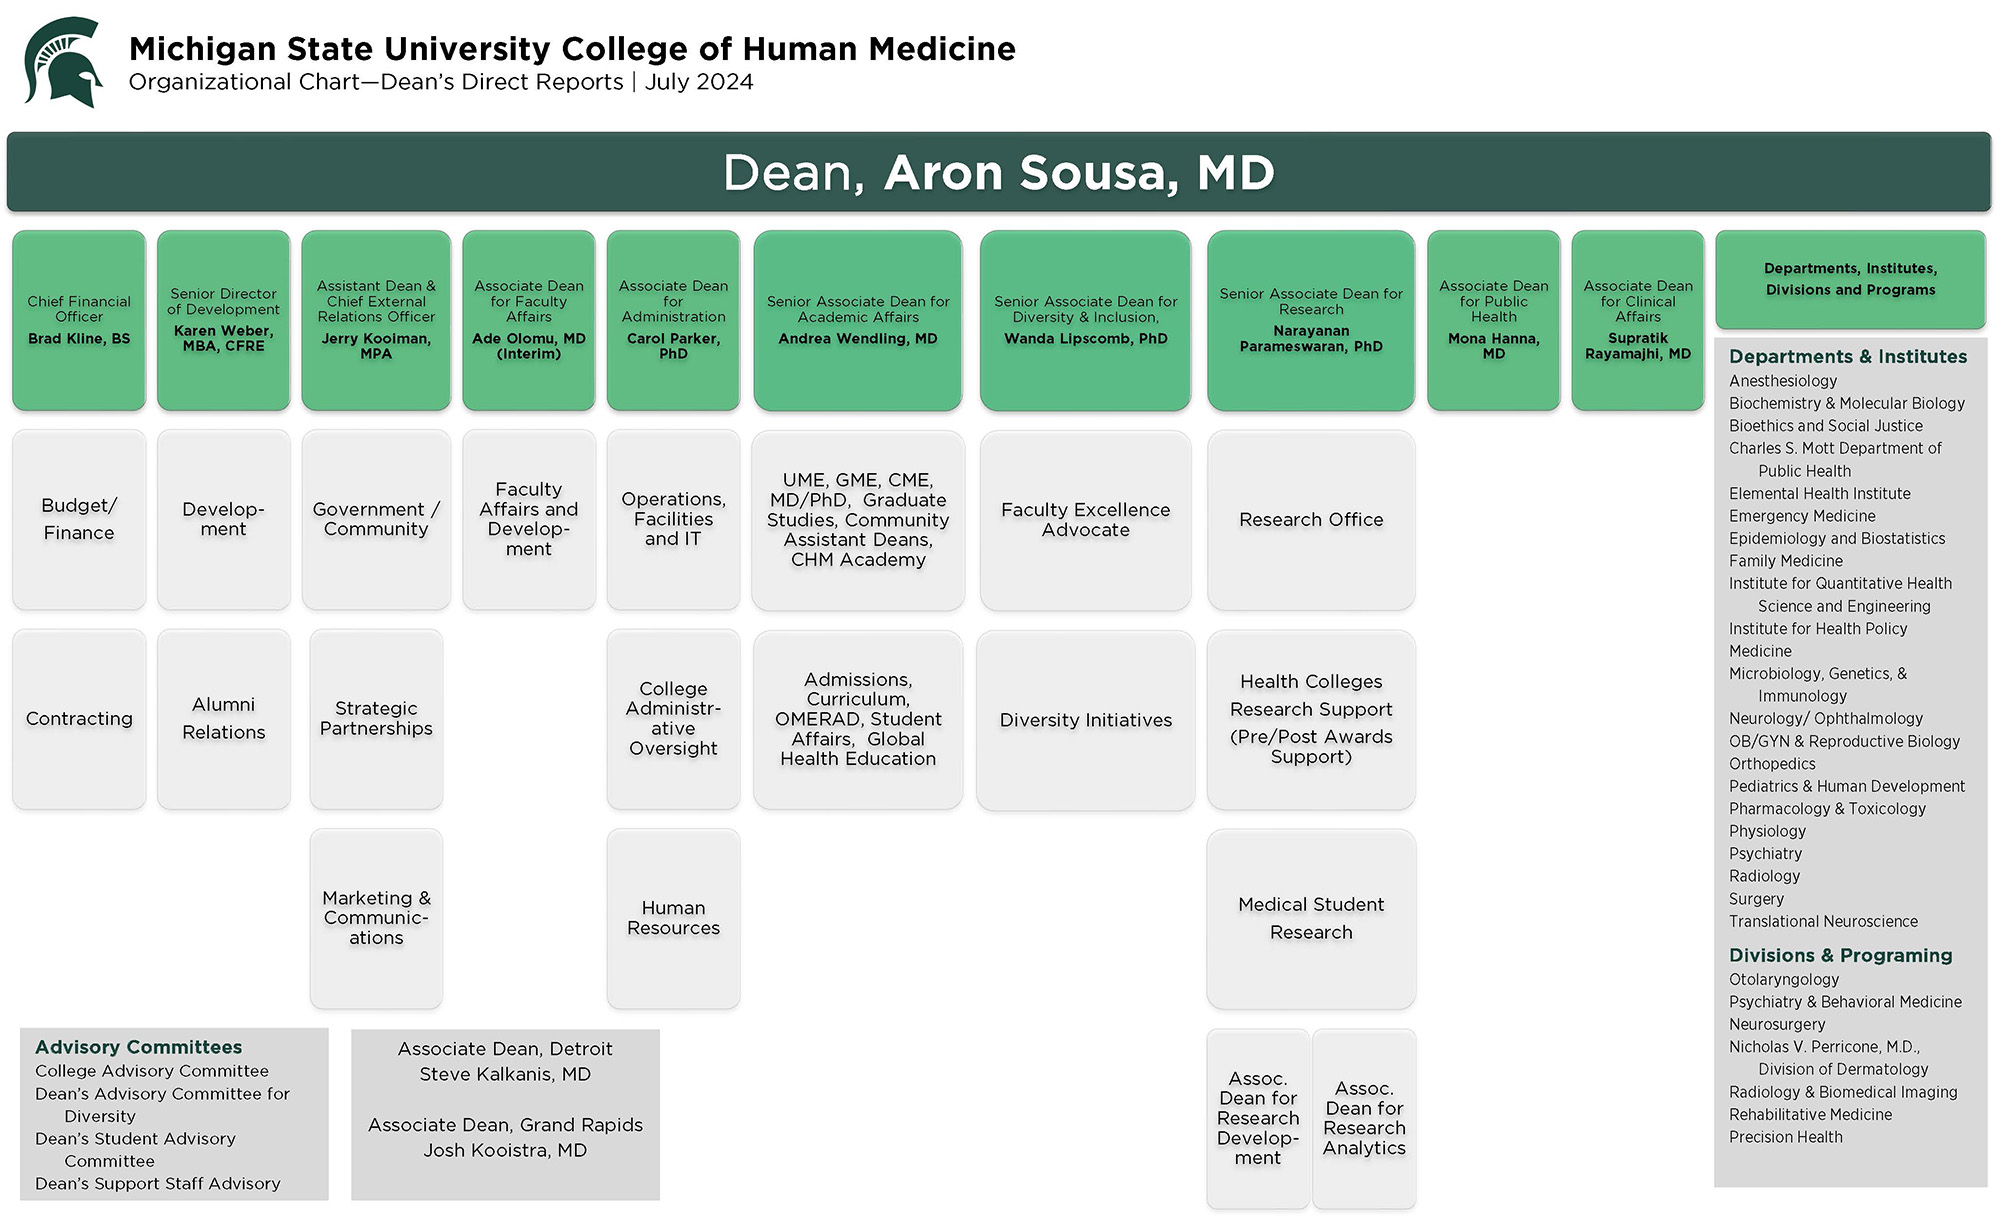 College organizational chart. Full alt text included below.